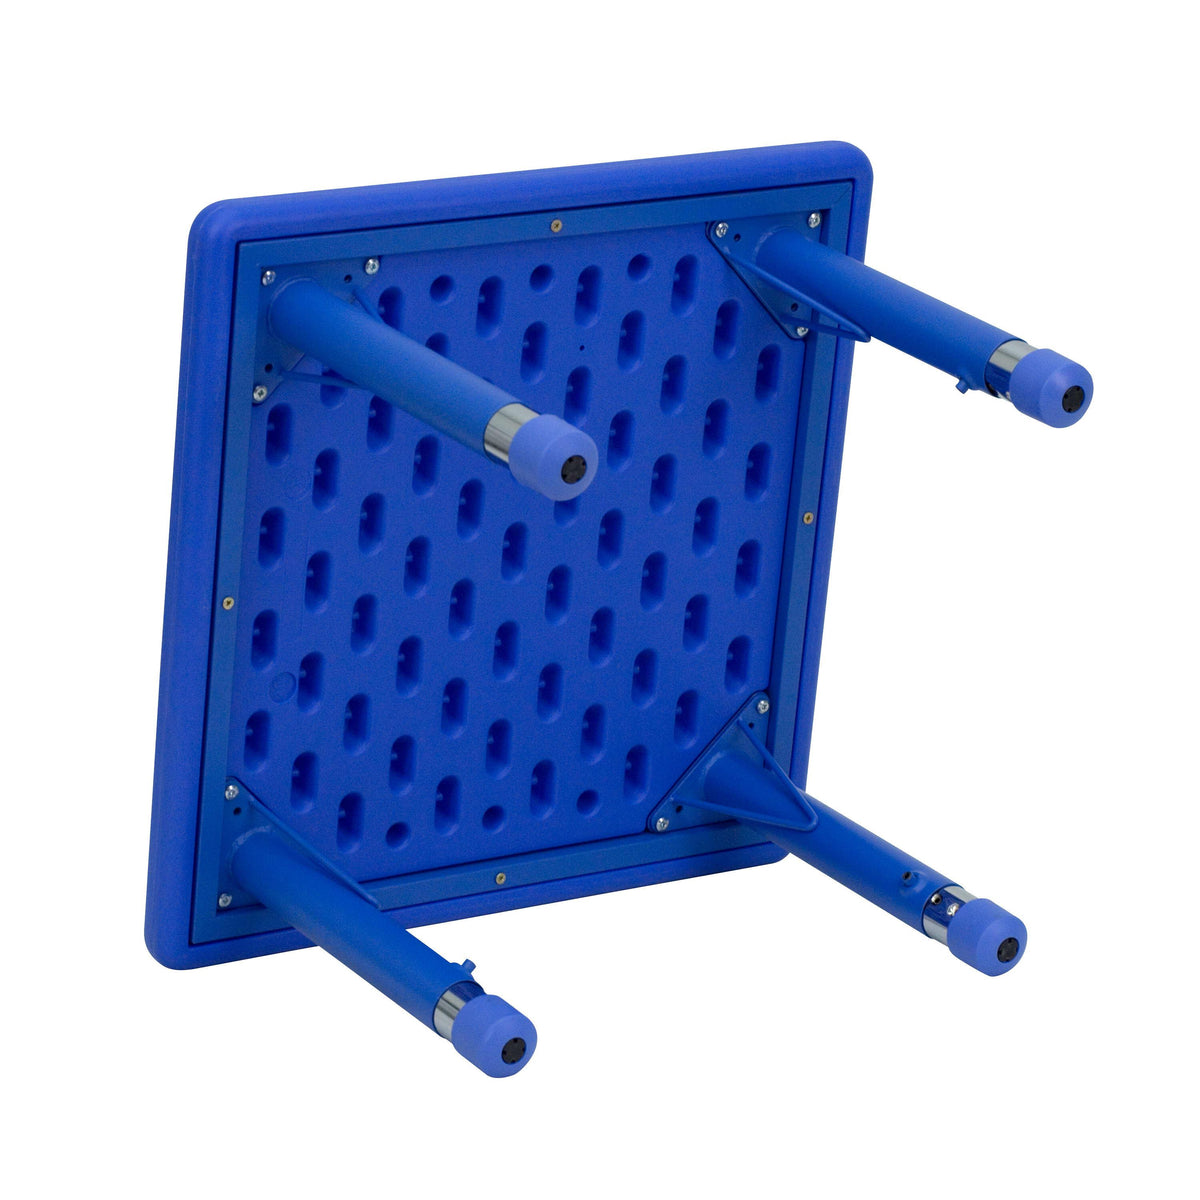 Blue |#| 24inch Square Blue Plastic Height Adjustable Activity Table